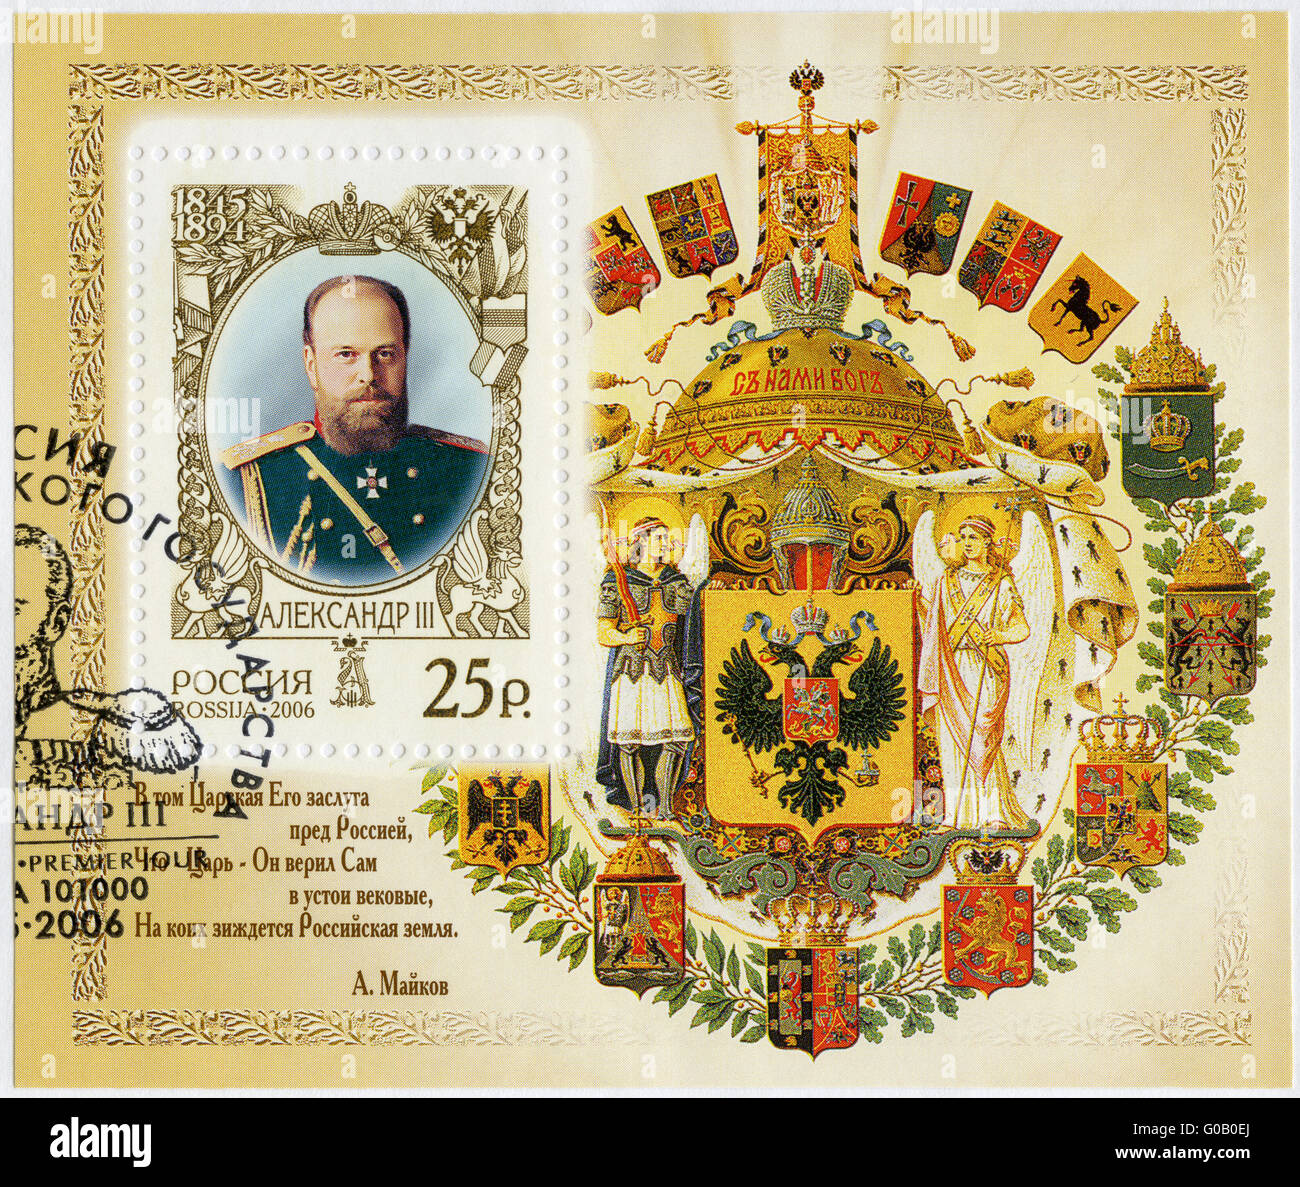 RUSSIA - 2006: shows Alexander III (1845-1894), the emperor, the history of the Russian State Stock Photo